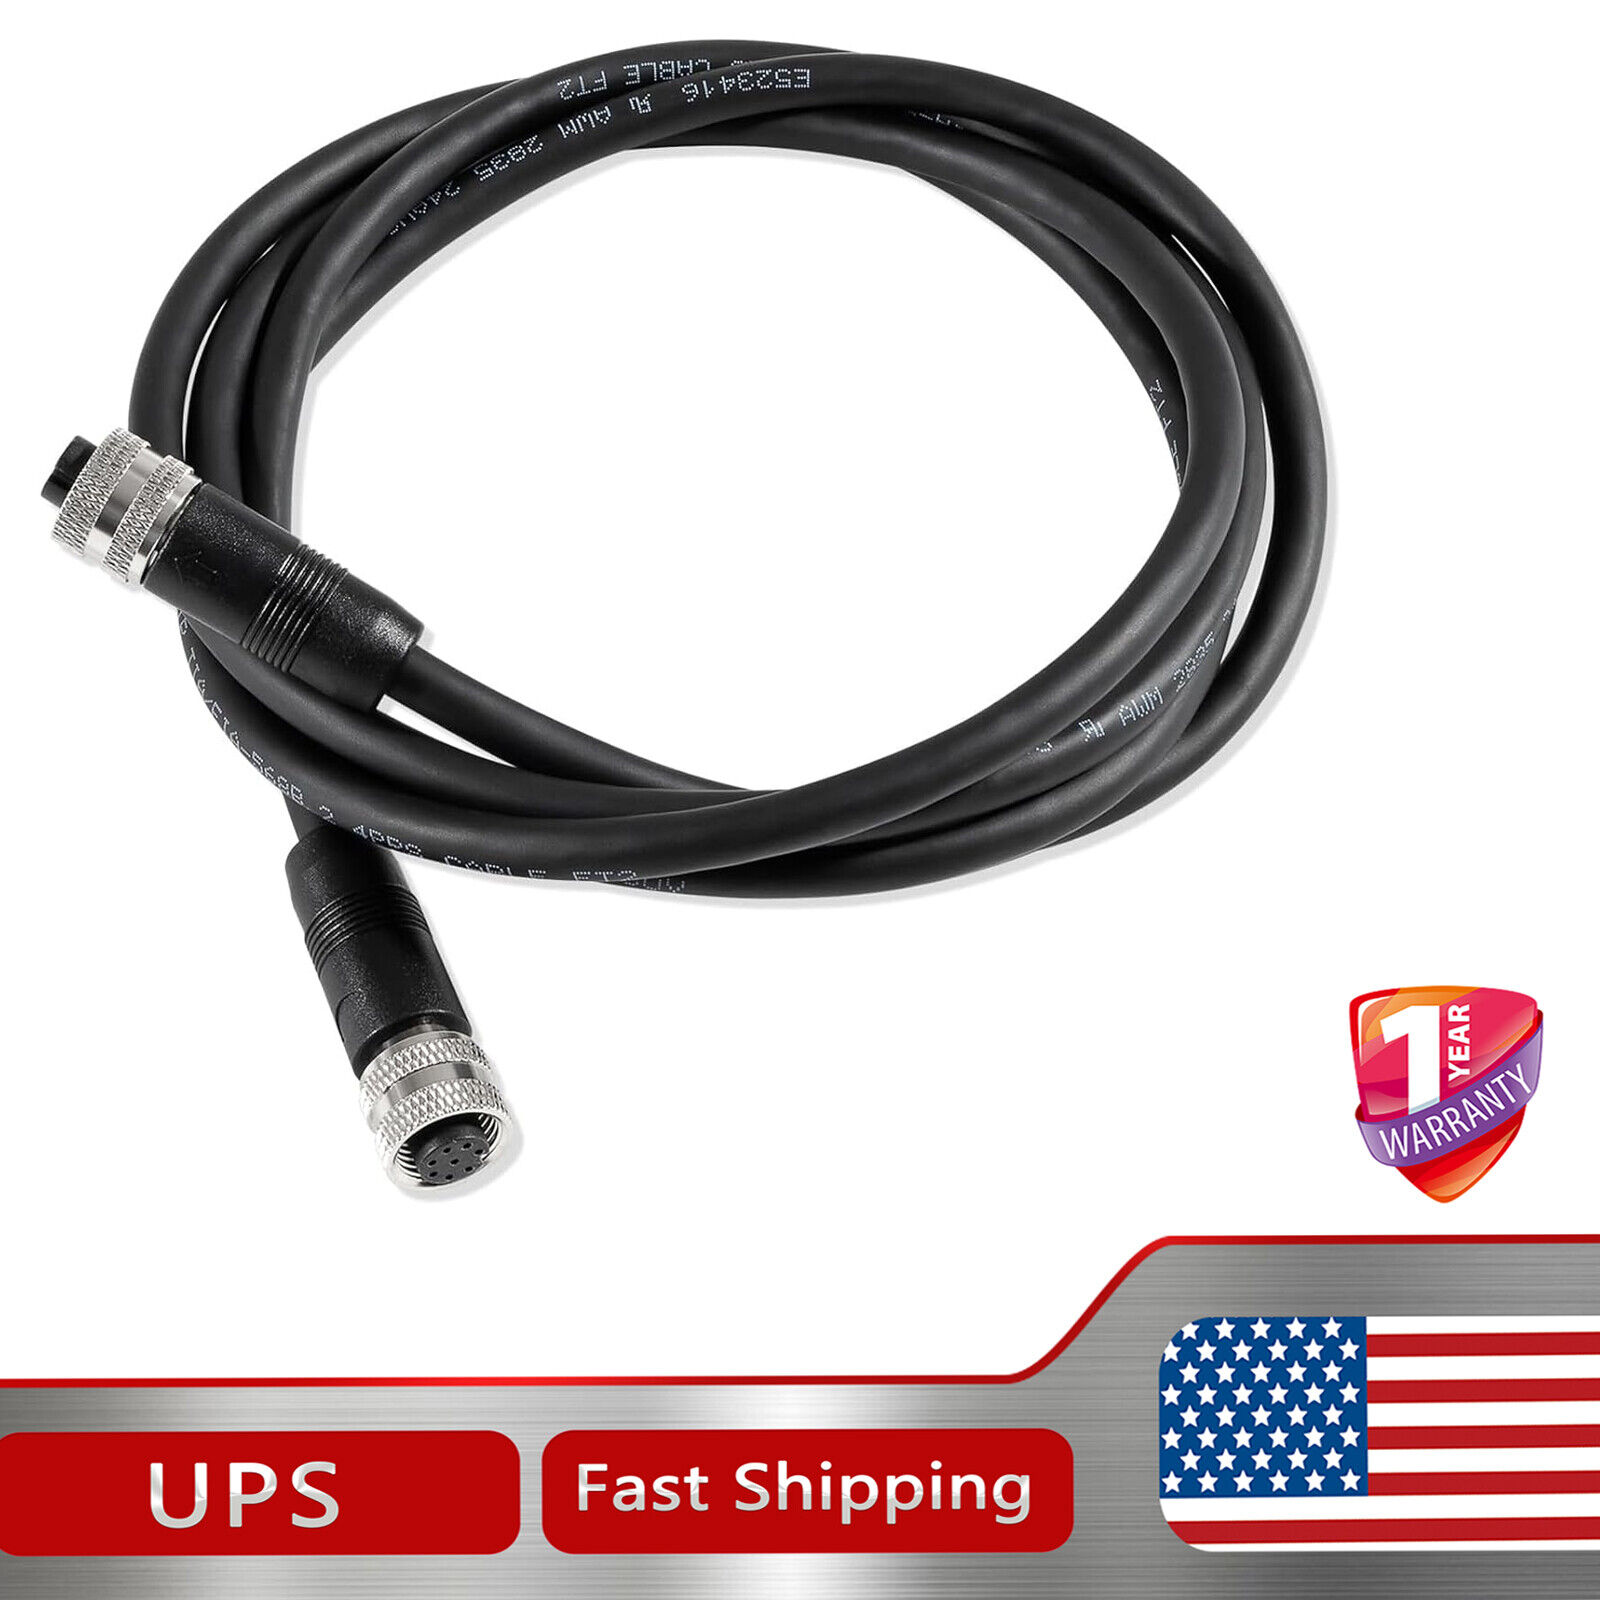 FOR HUMMINBIRD AS EC 5E ETHERNET CABLE